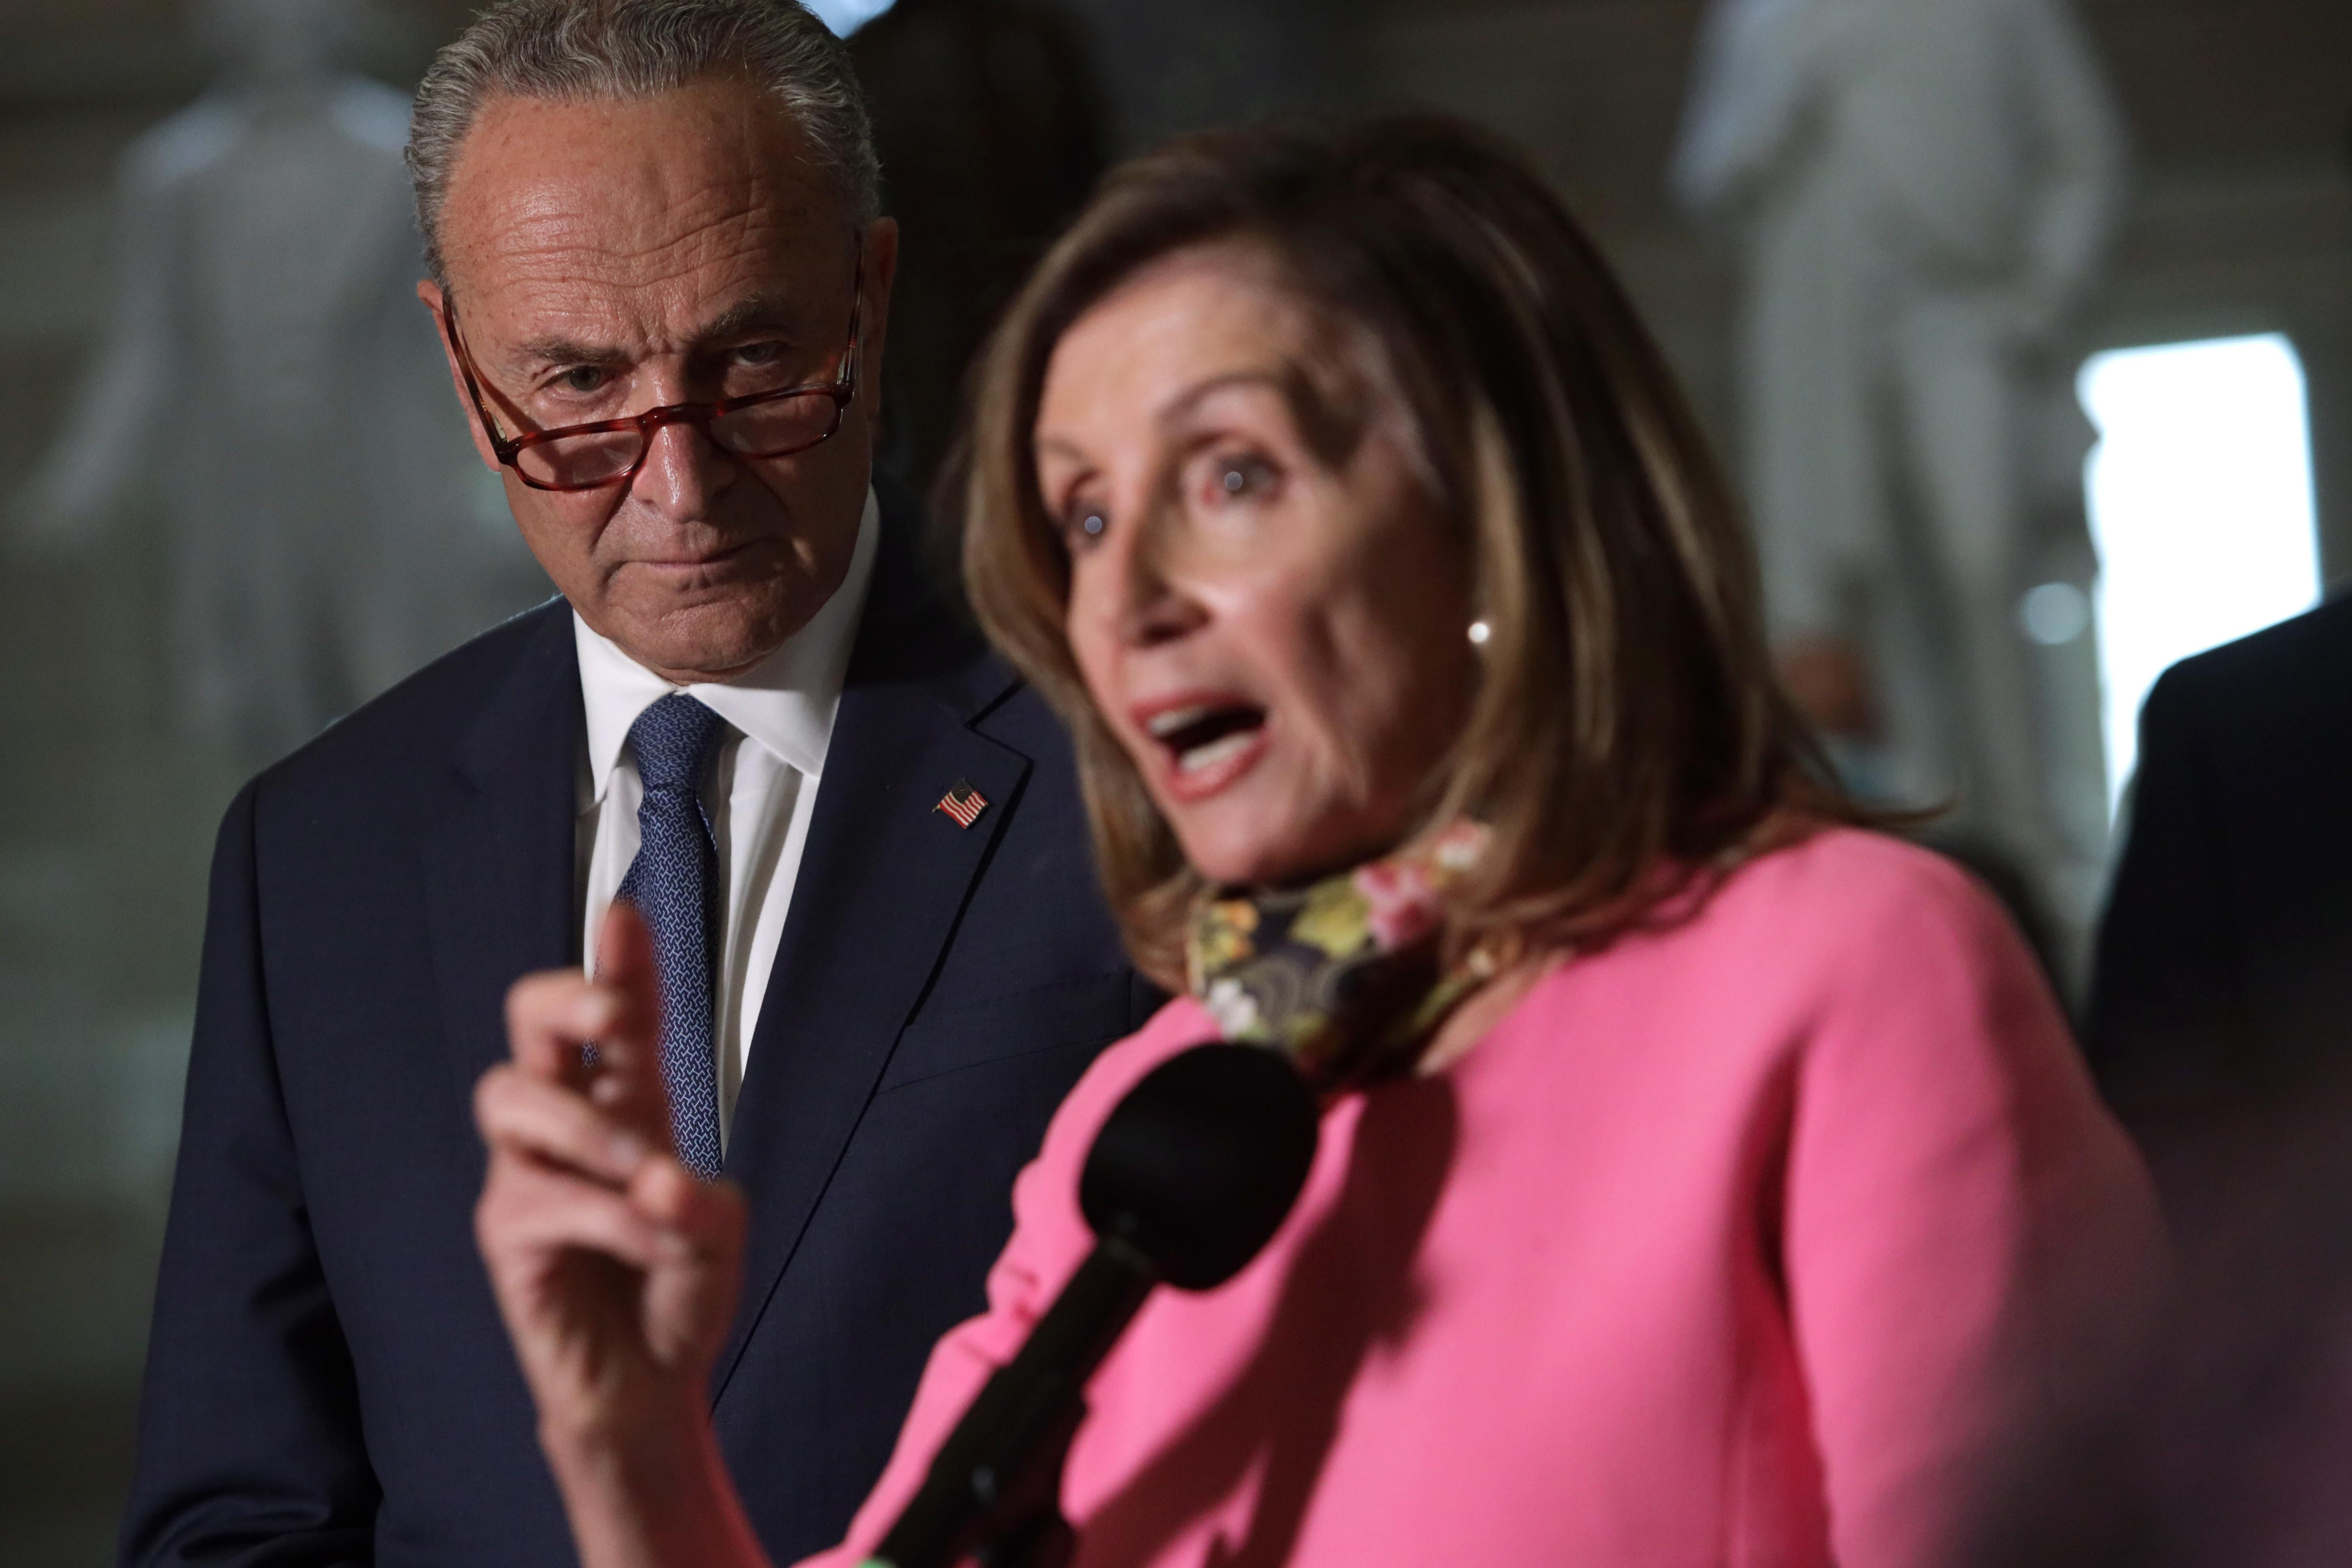 Schumer, glancing above his glasses, looks over Pelosi's shoulder as she speaks into a microphone.